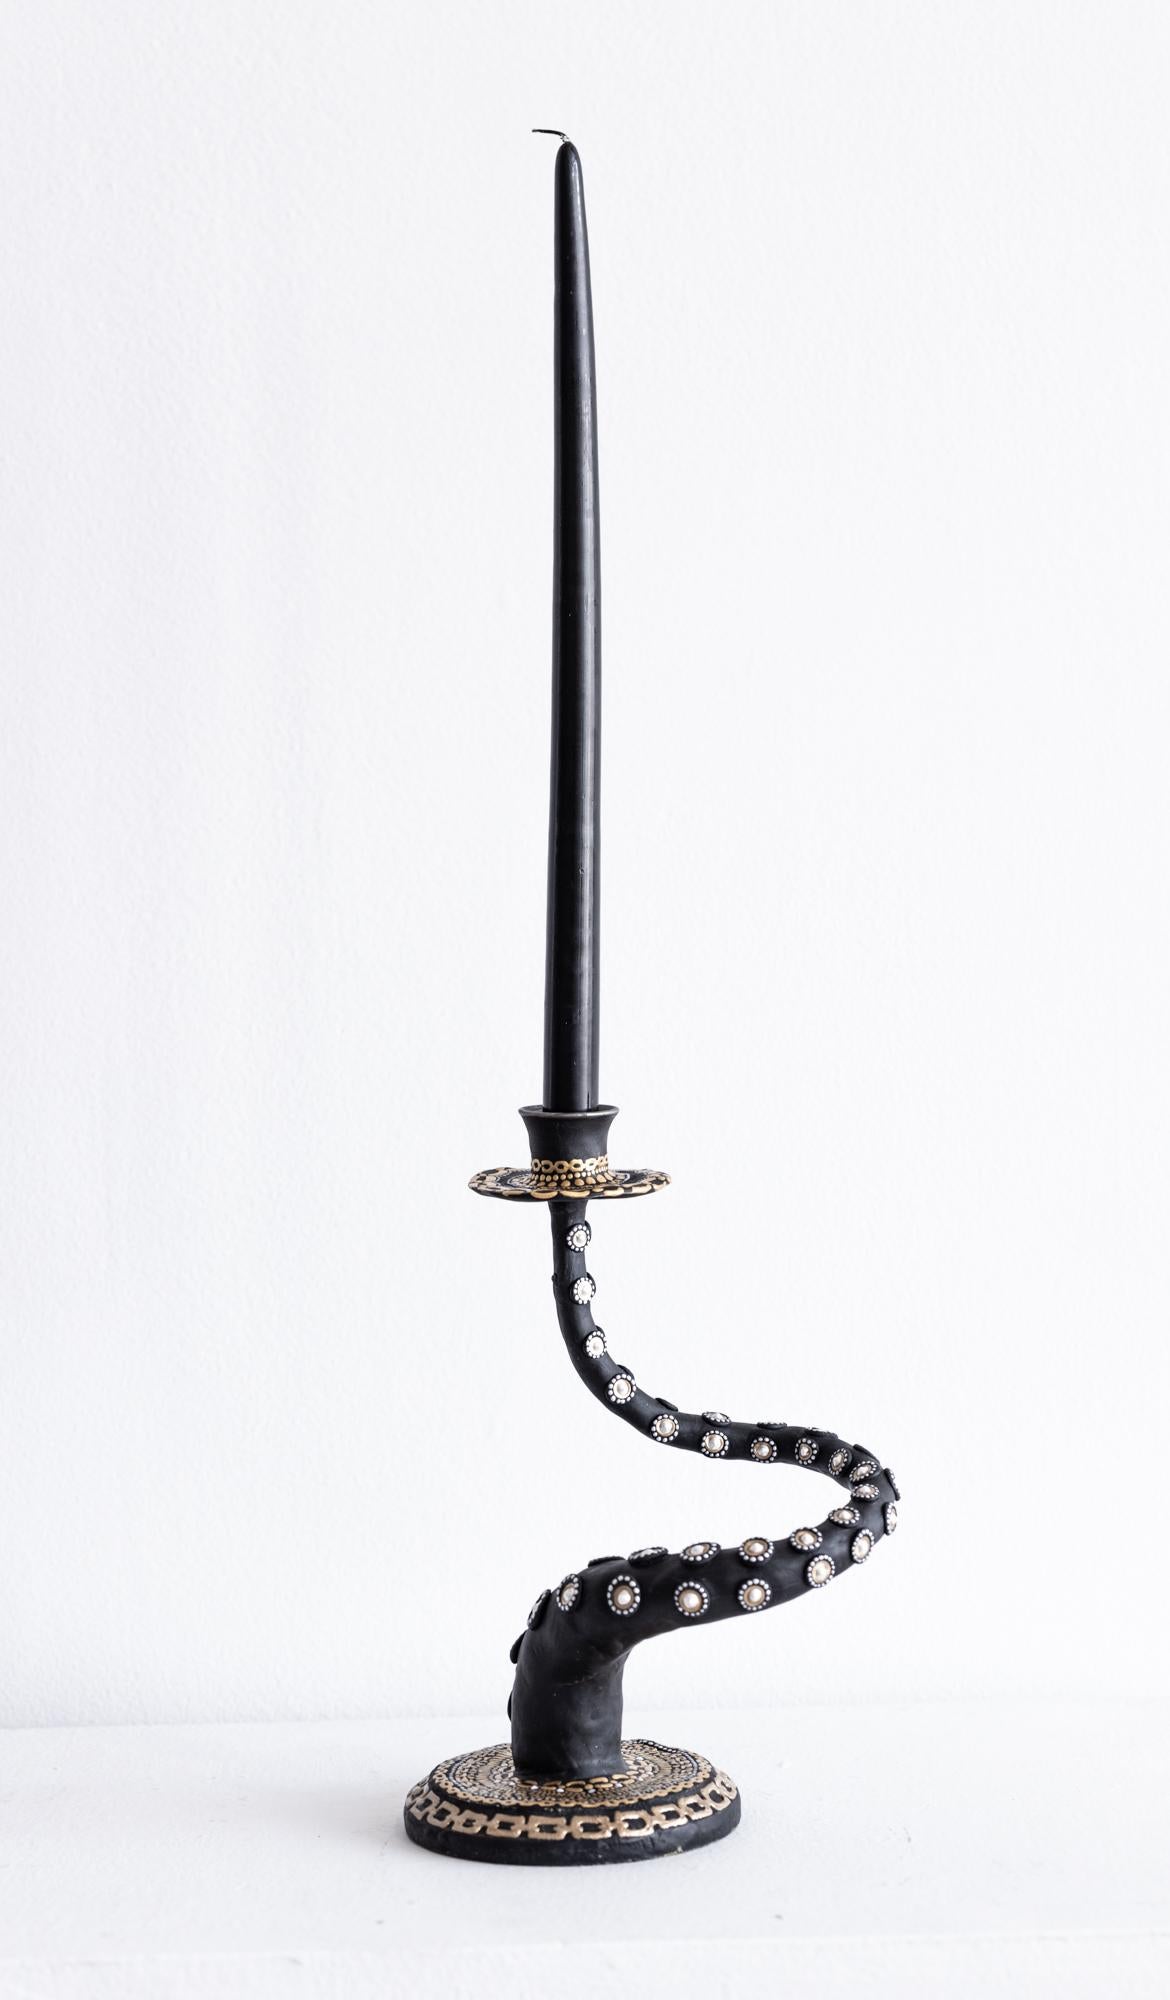 "Chanel Tentacle Candelabra" Dimensional paint, epoxy clay, lamp parts